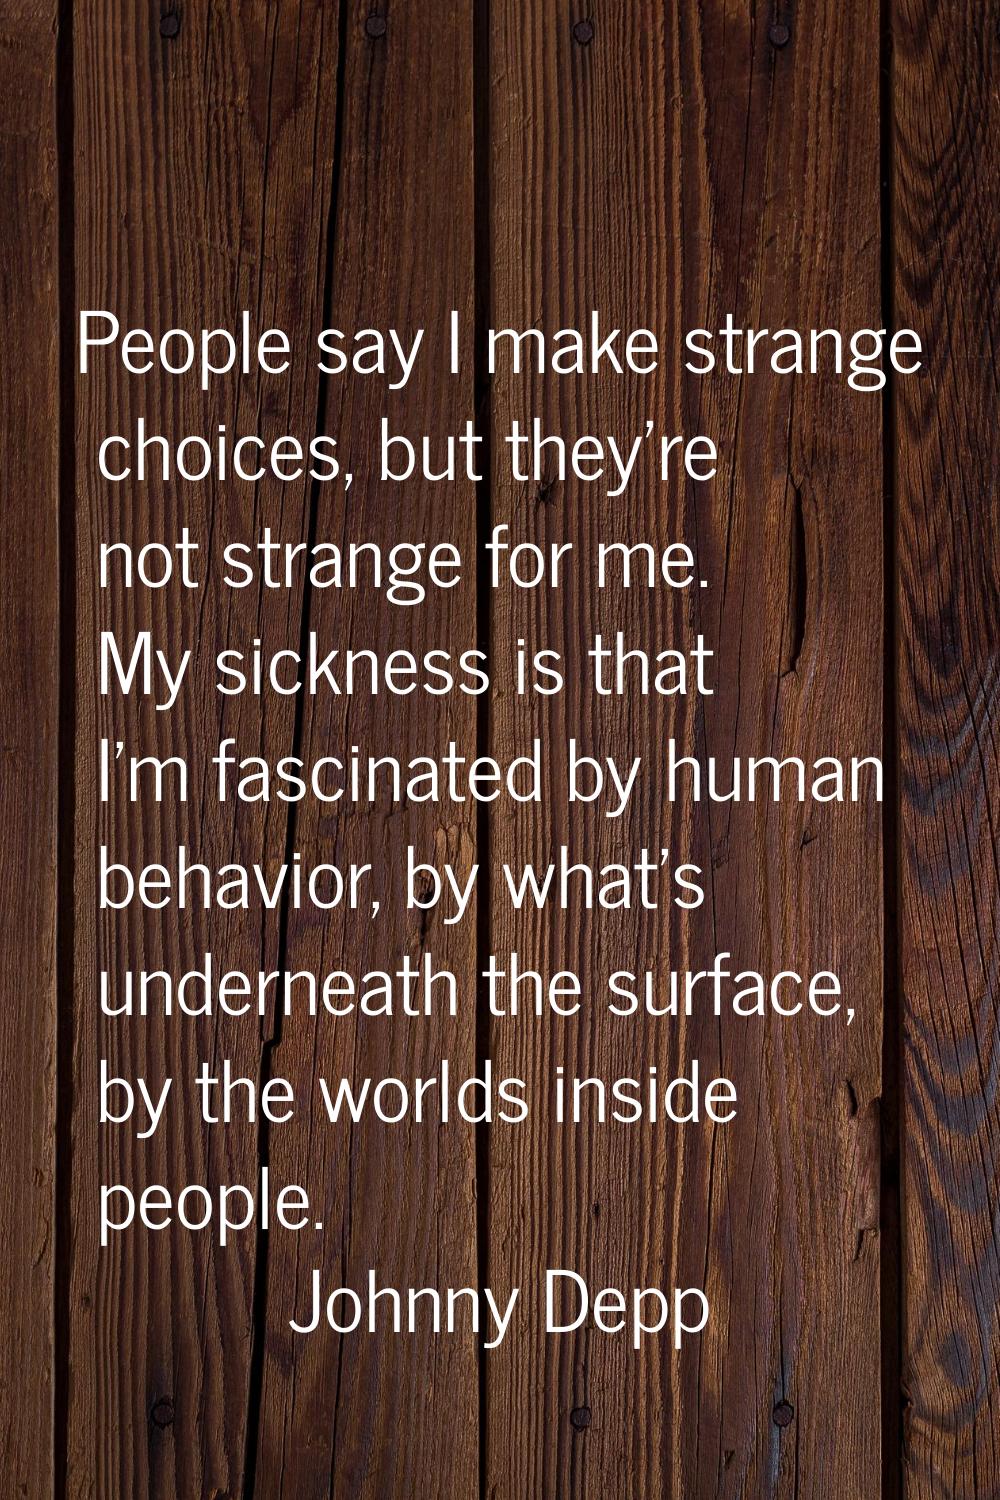 People say I make strange choices, but they're not strange for me. My sickness is that I'm fascinat